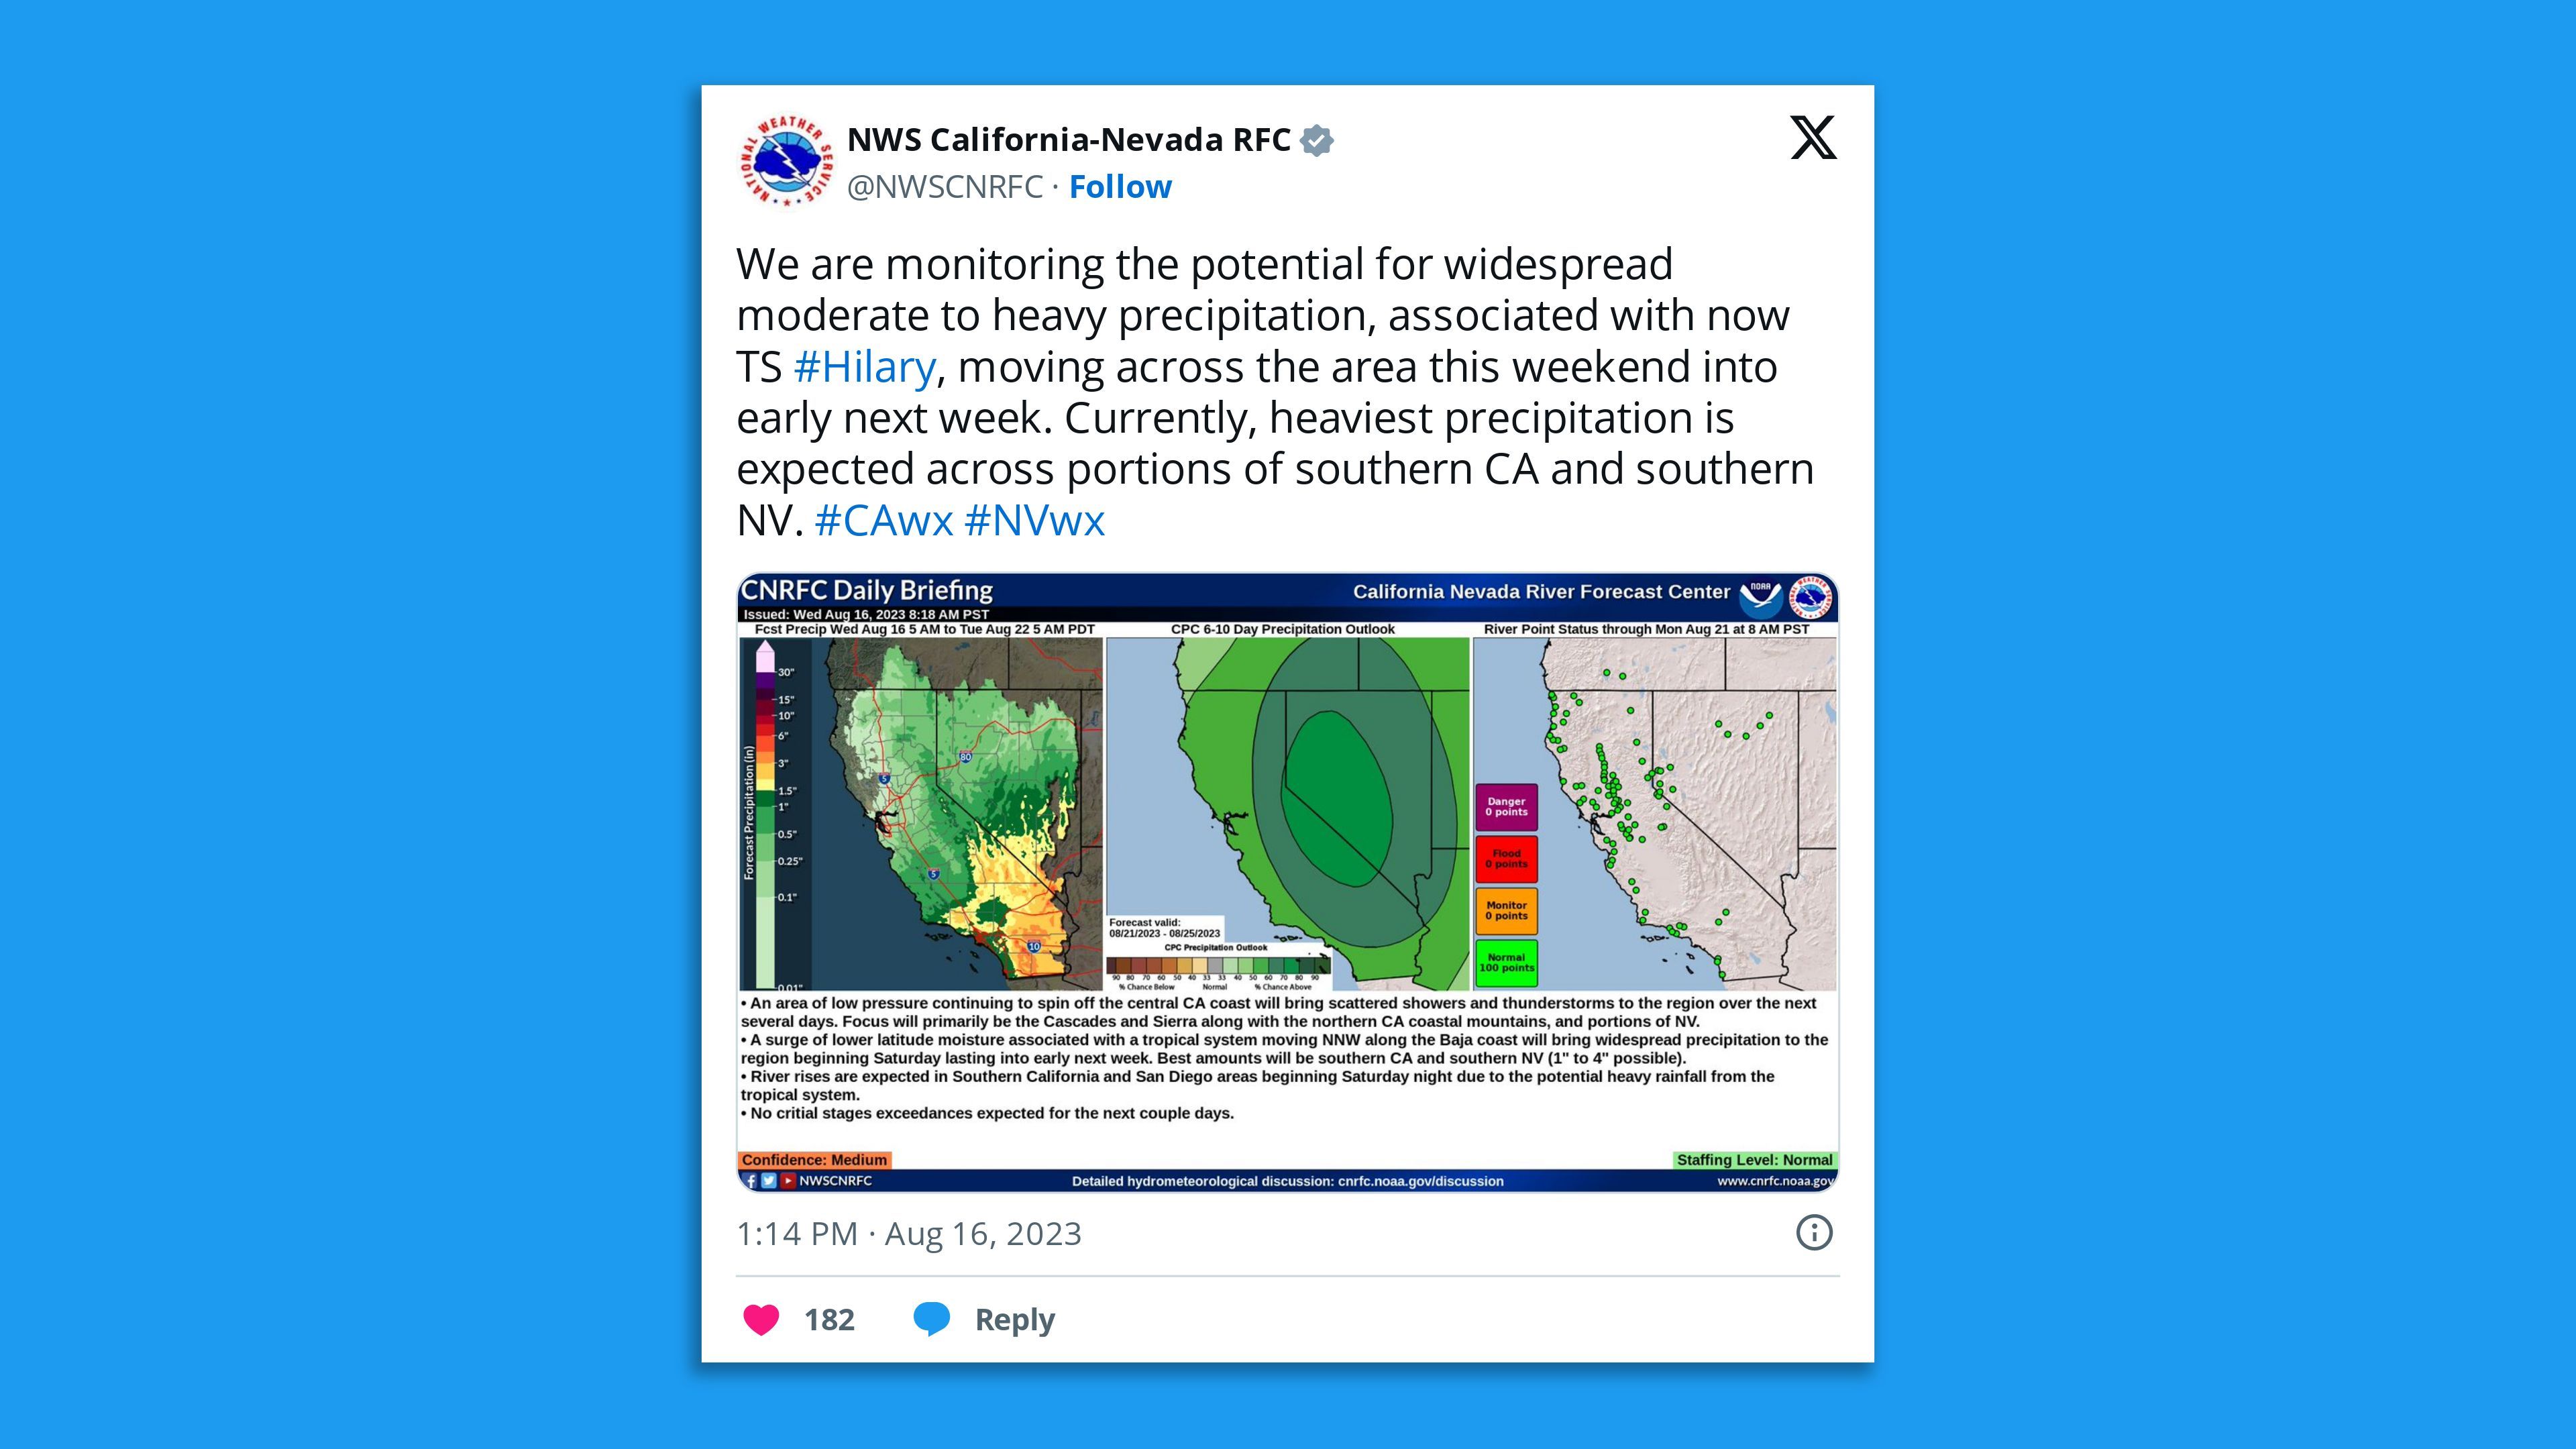 Tweet image from the National Weather Service.